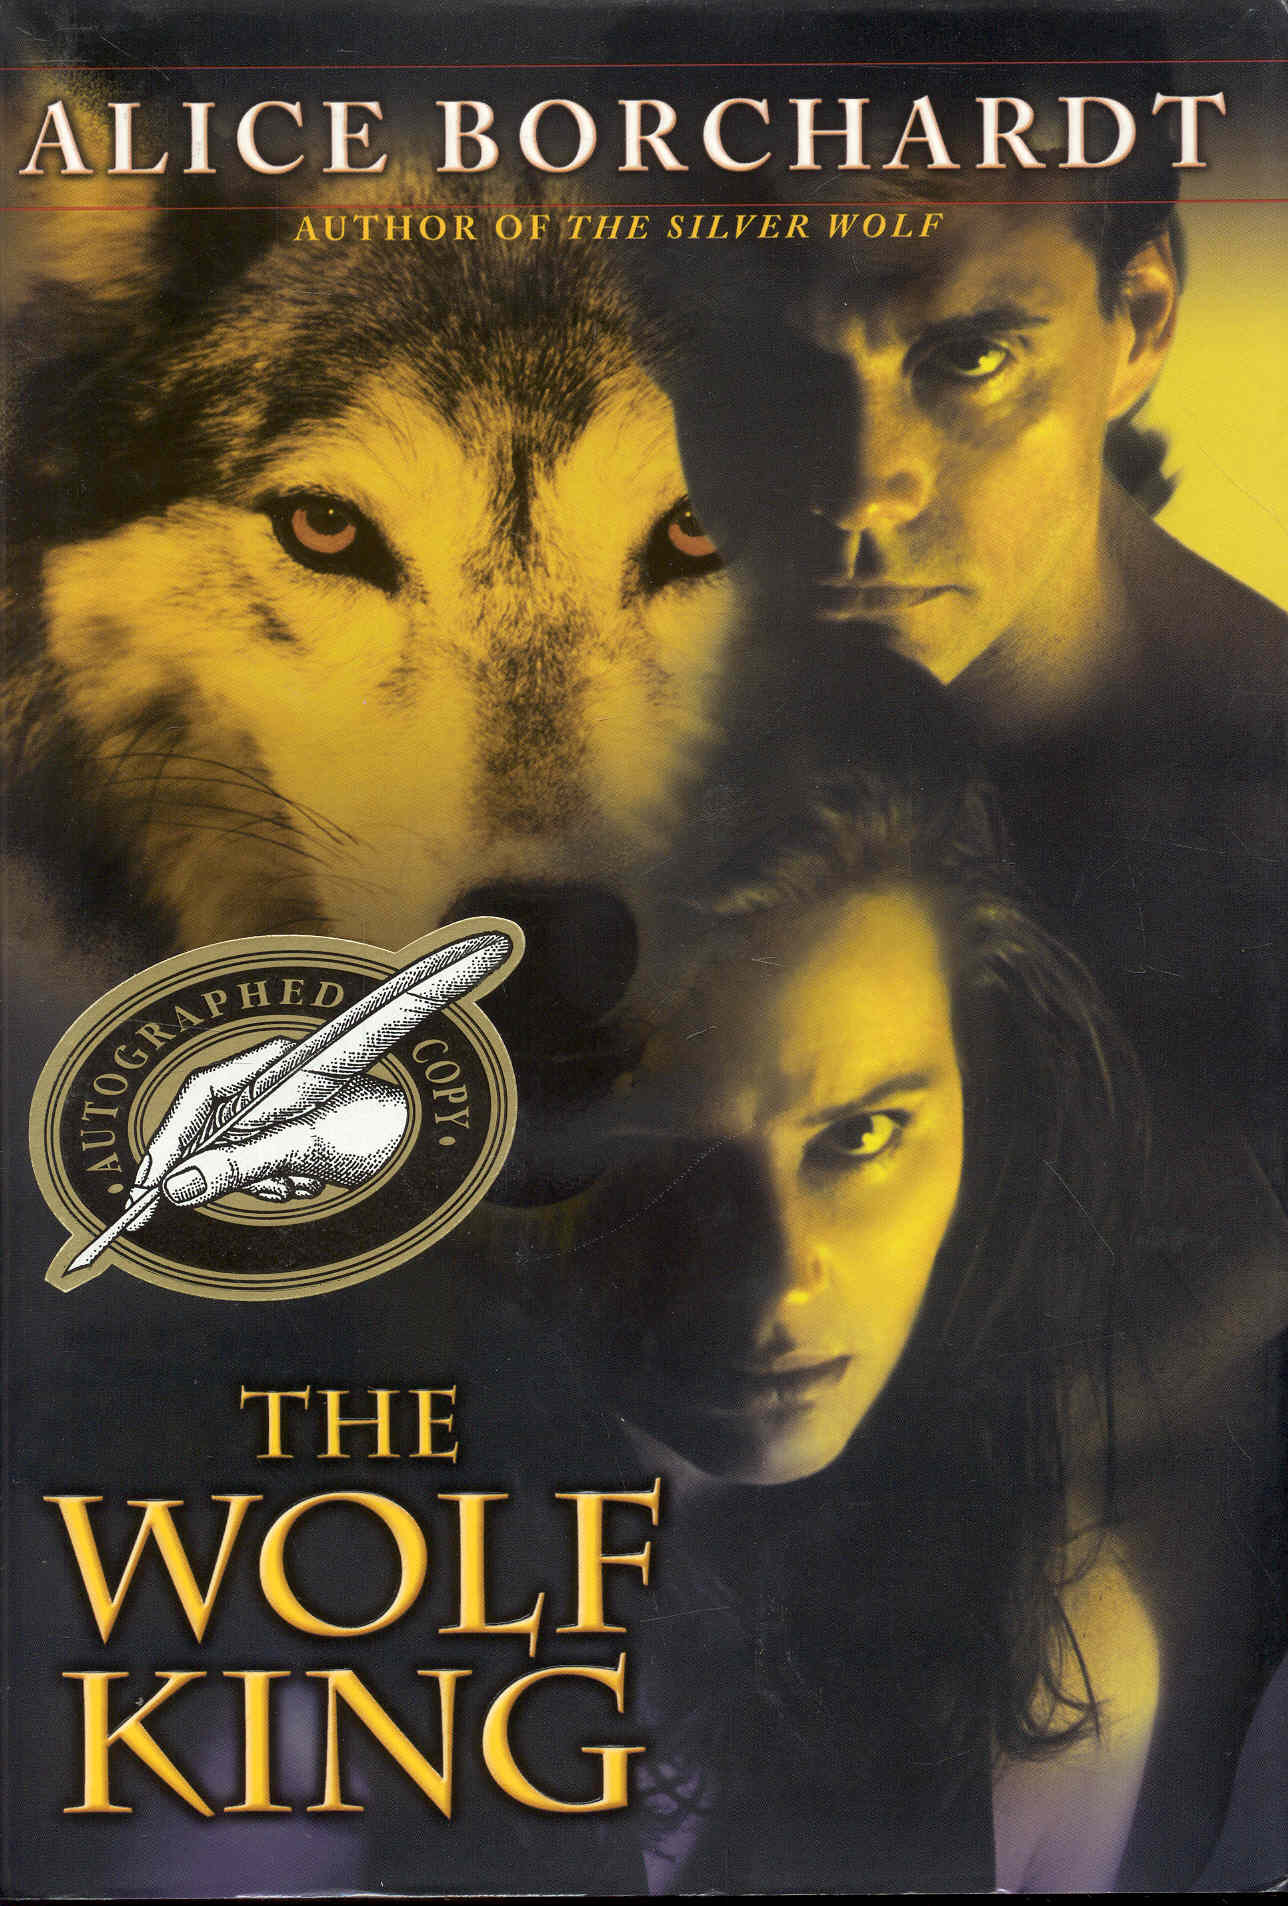 Image for The Wolf King